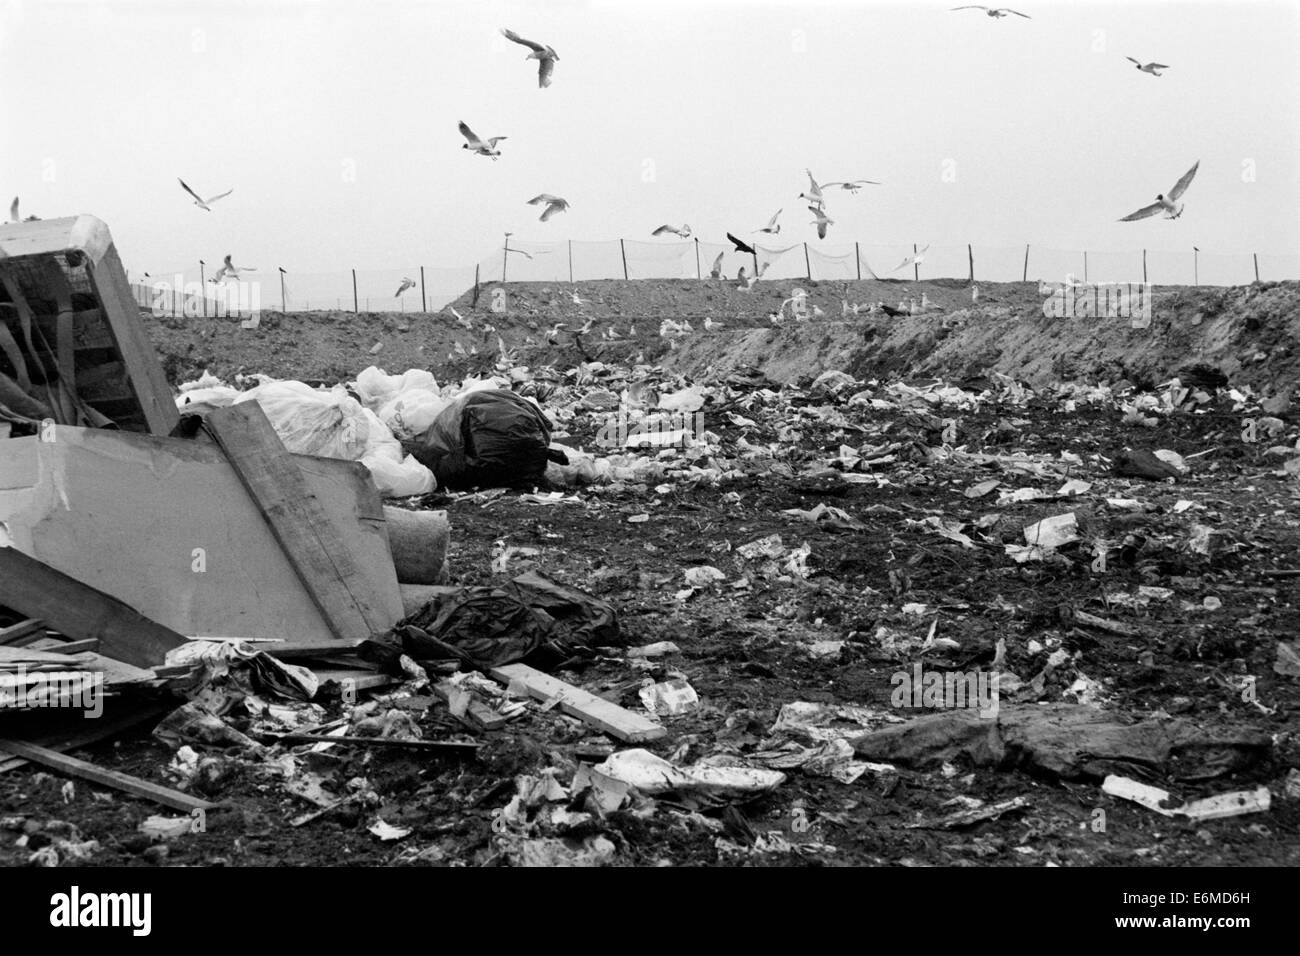 mounds of garbage at a landfill site in the 1990s which is now buried beneath port solent portsmouth england uk Stock Photo